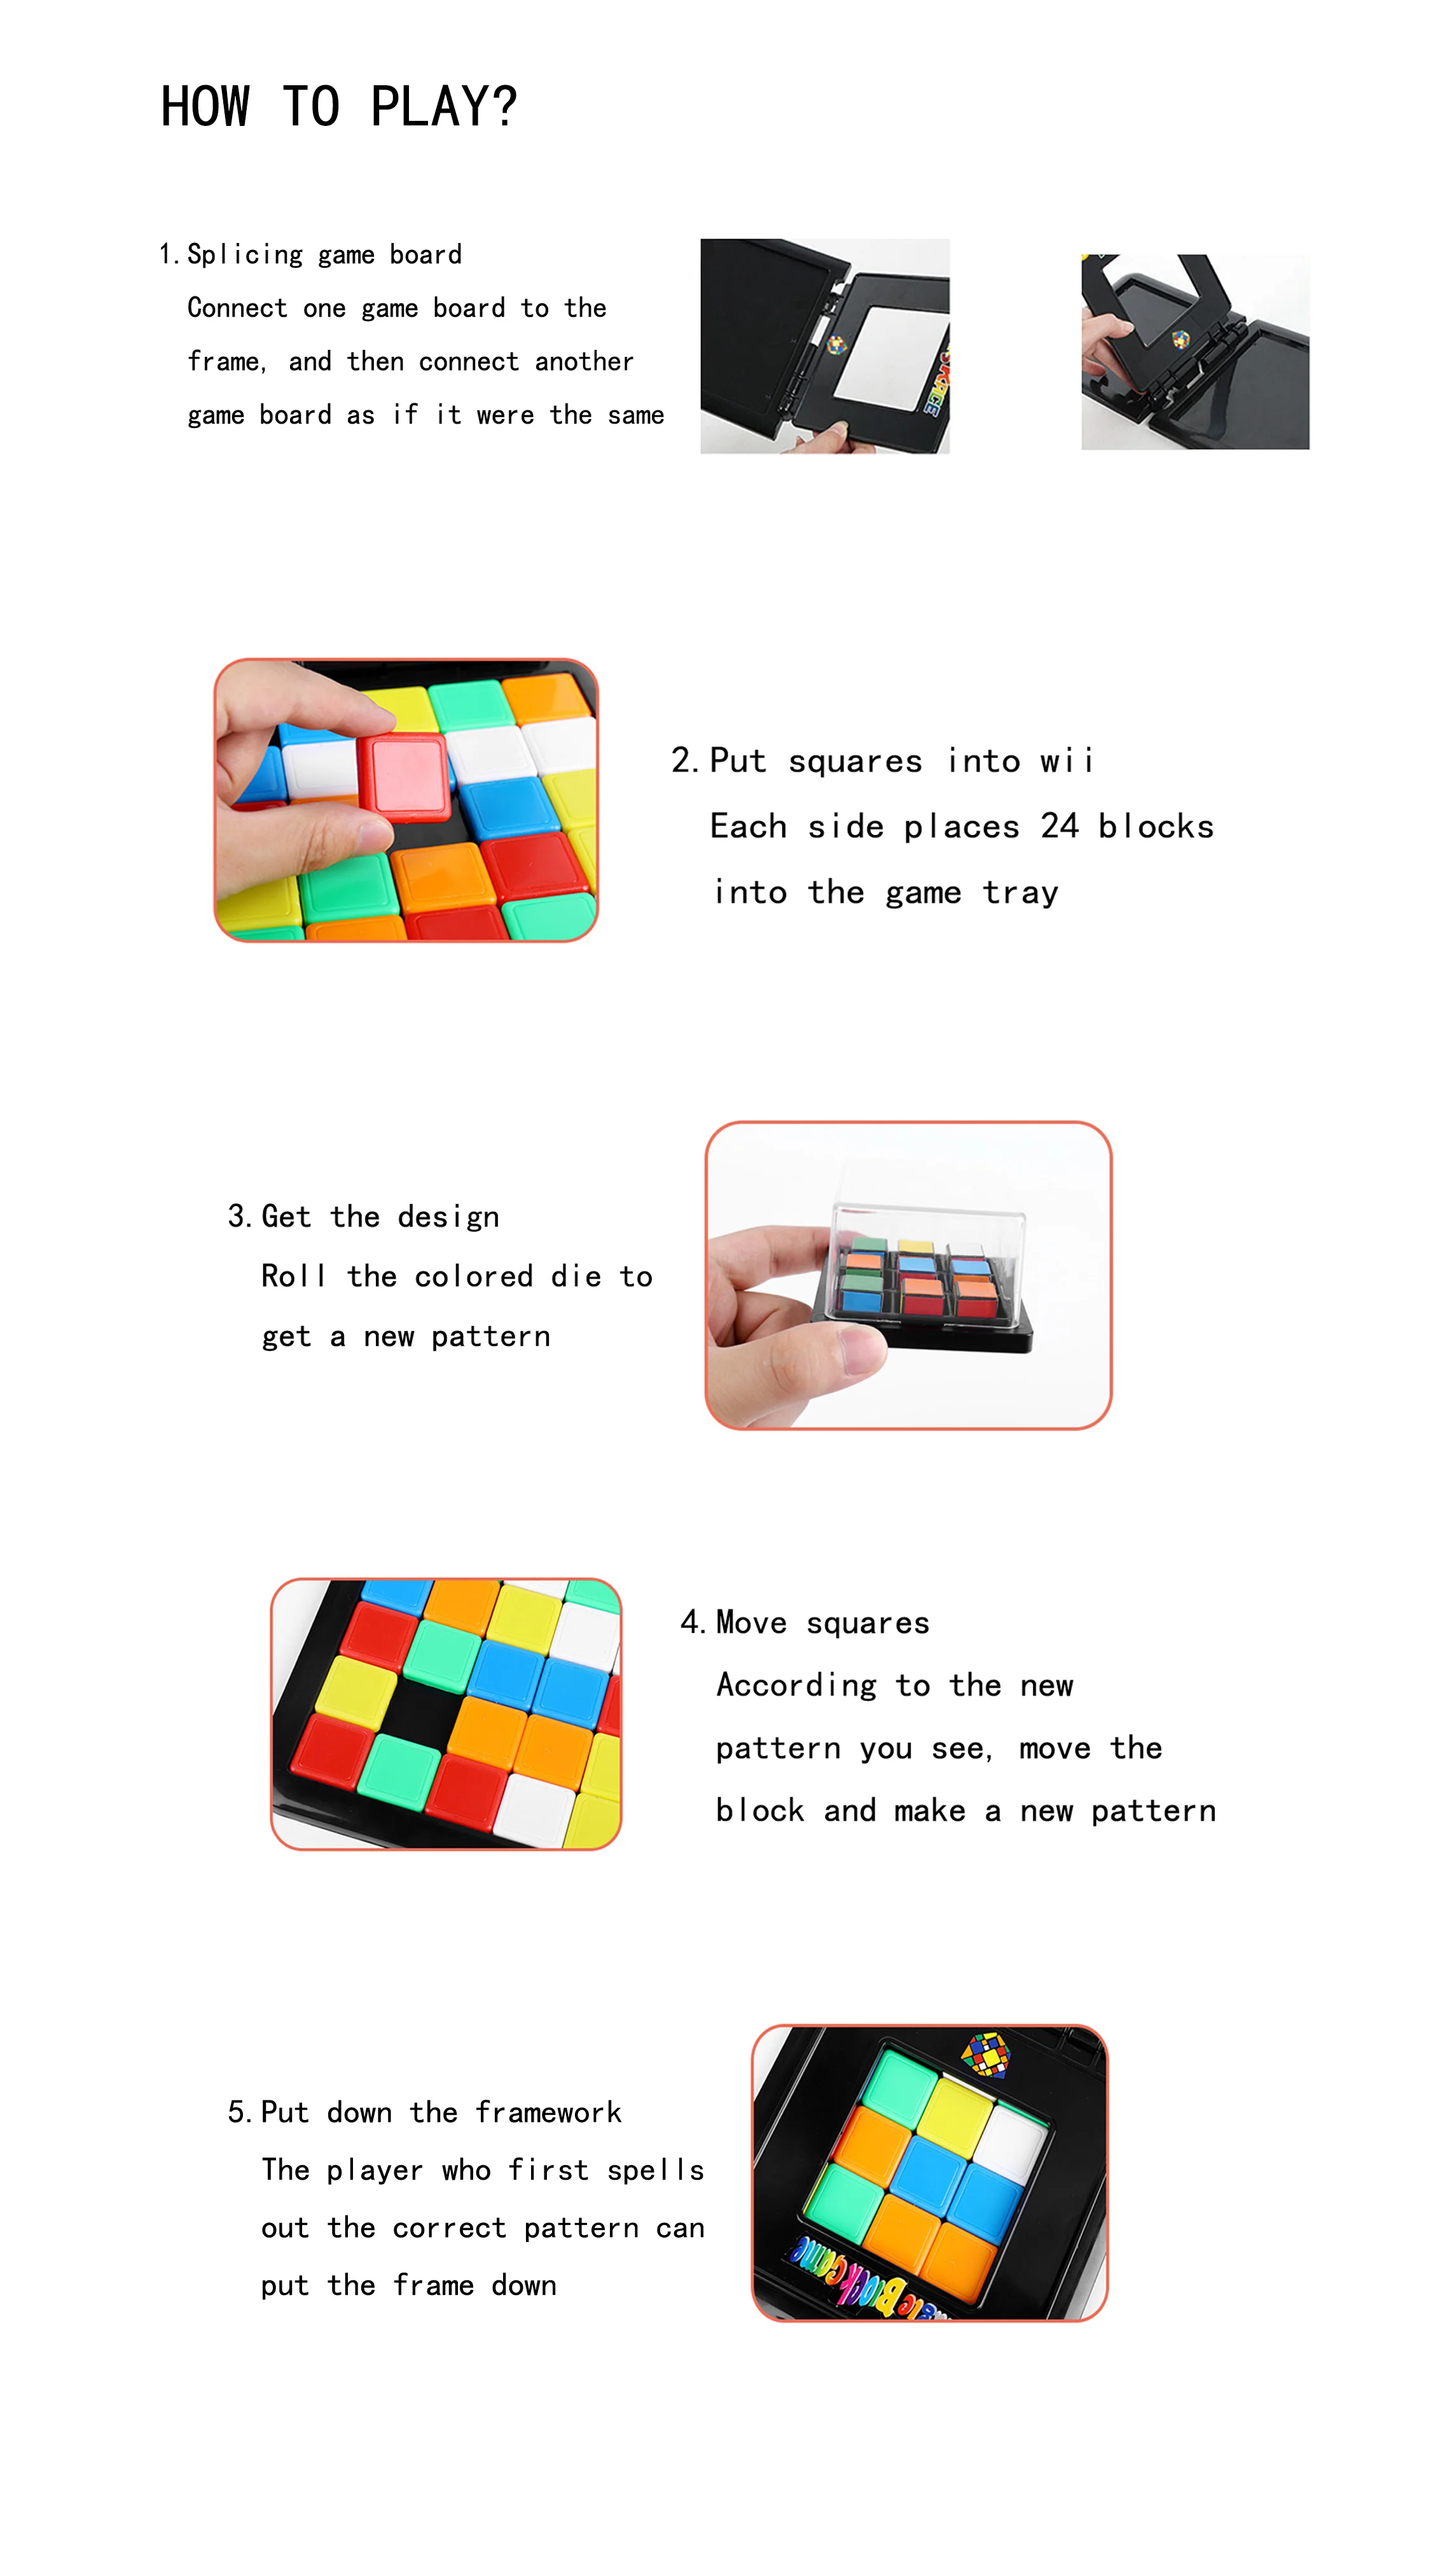 roll dice to move color magic rubikes cube puzzle game for two players